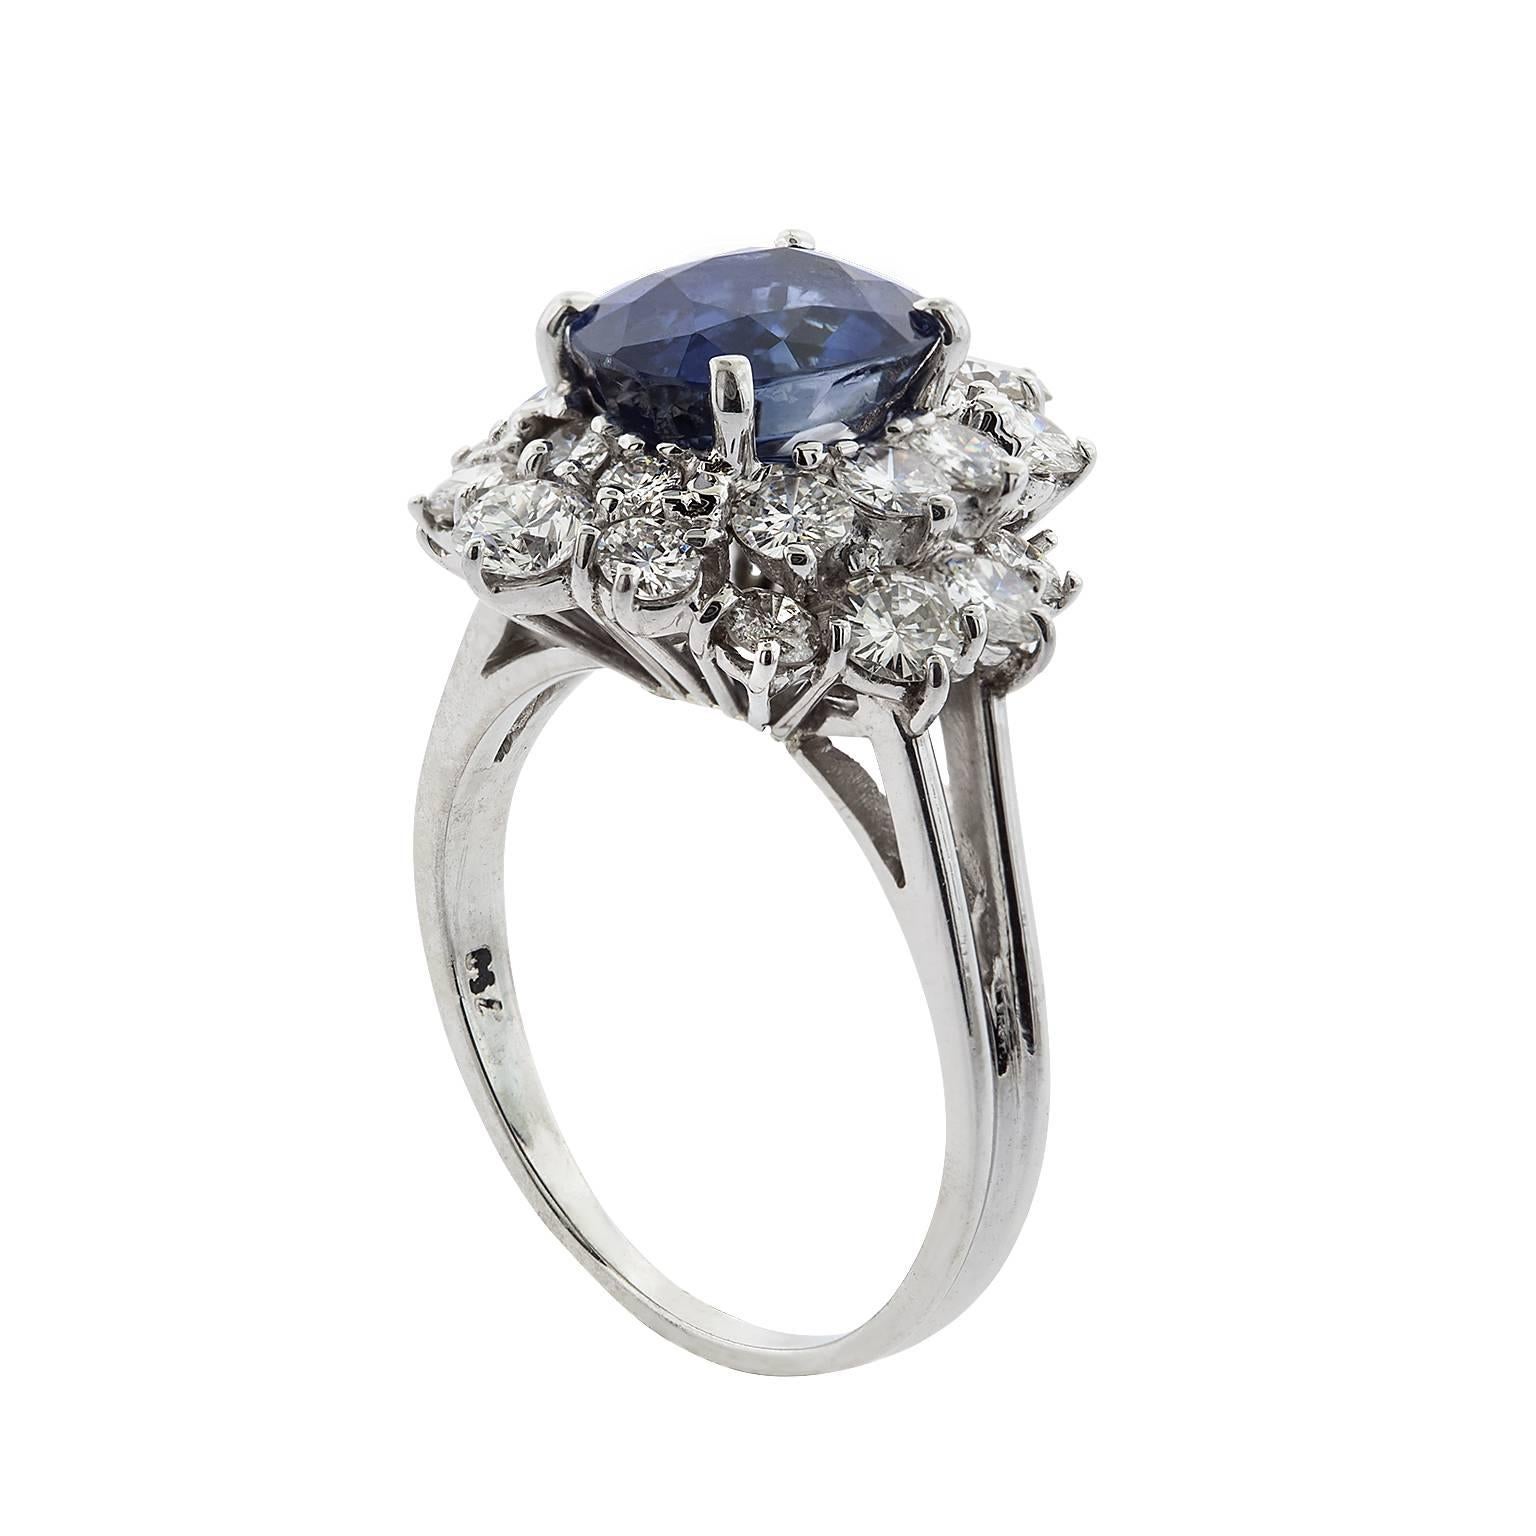 3.12 carat oval sapphire and diamond ring in 18 karat white gold.  The sapphire is set with four prongs, and surrounded by two rows of staggered height round brilliant diamonds.  The diamonds have a total weight of 1.85 carats, and are G/H color,